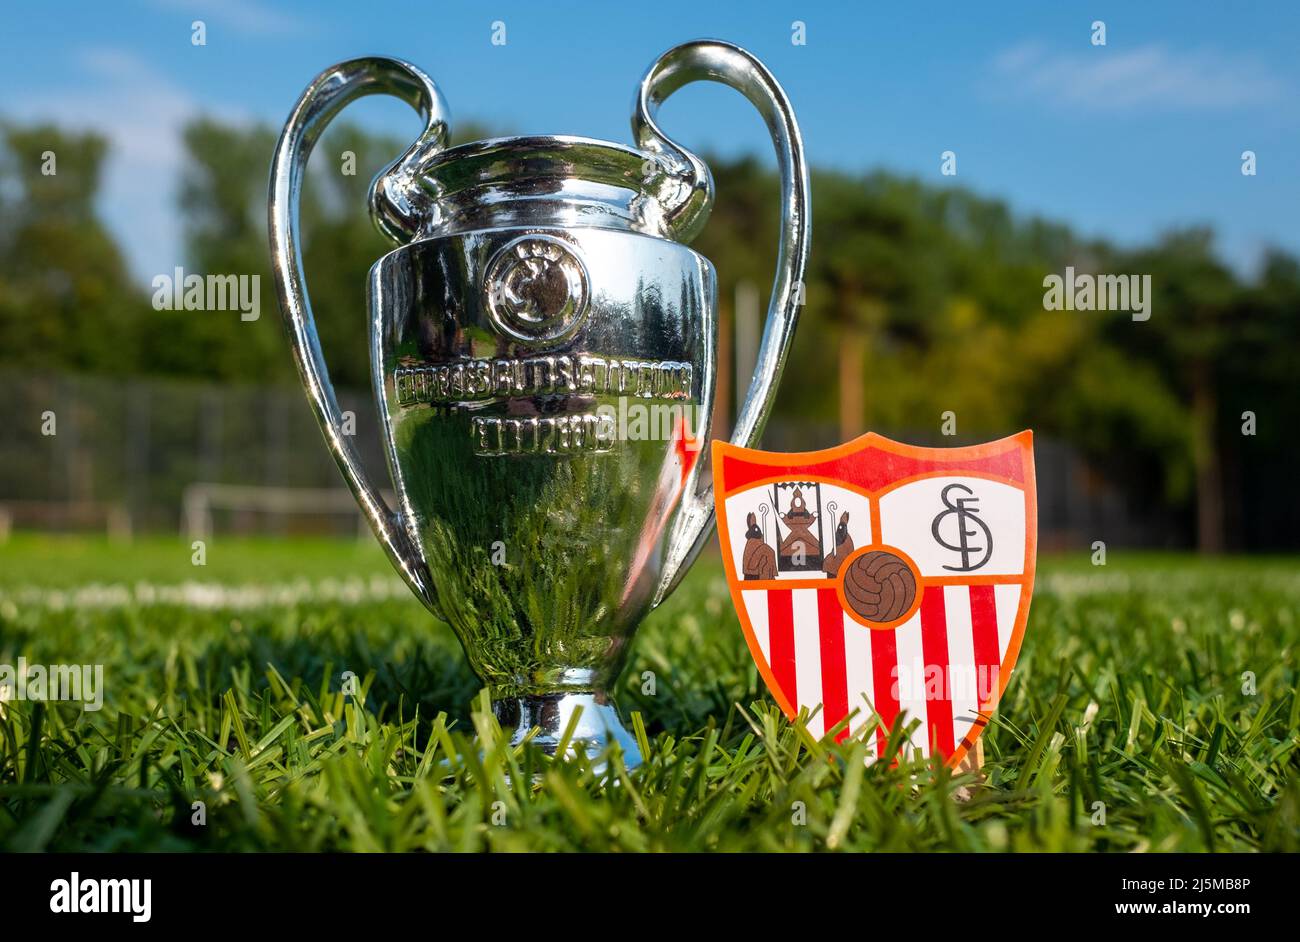 August 30, 2021, Seville, Spain. The Sevilla FC emblem and the UEFA Champions League Cup on the green turf of the stadium. Stock Photo